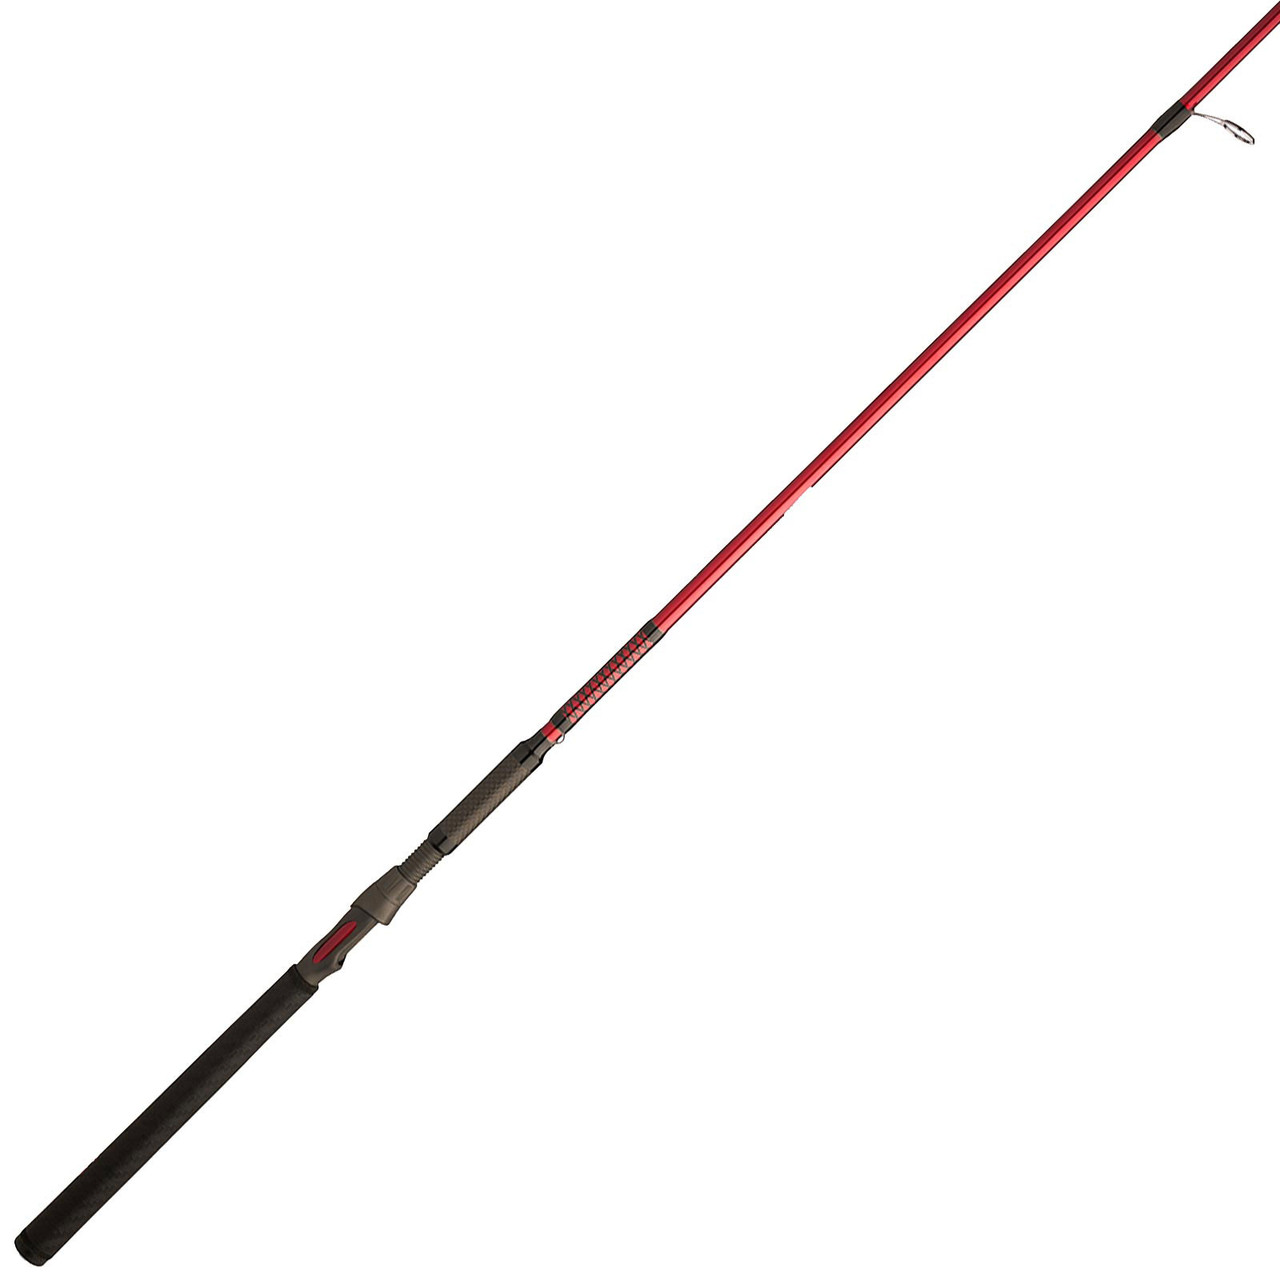 What Is an Ugly Stick Fishing Rod Made Of? - Trickyfish